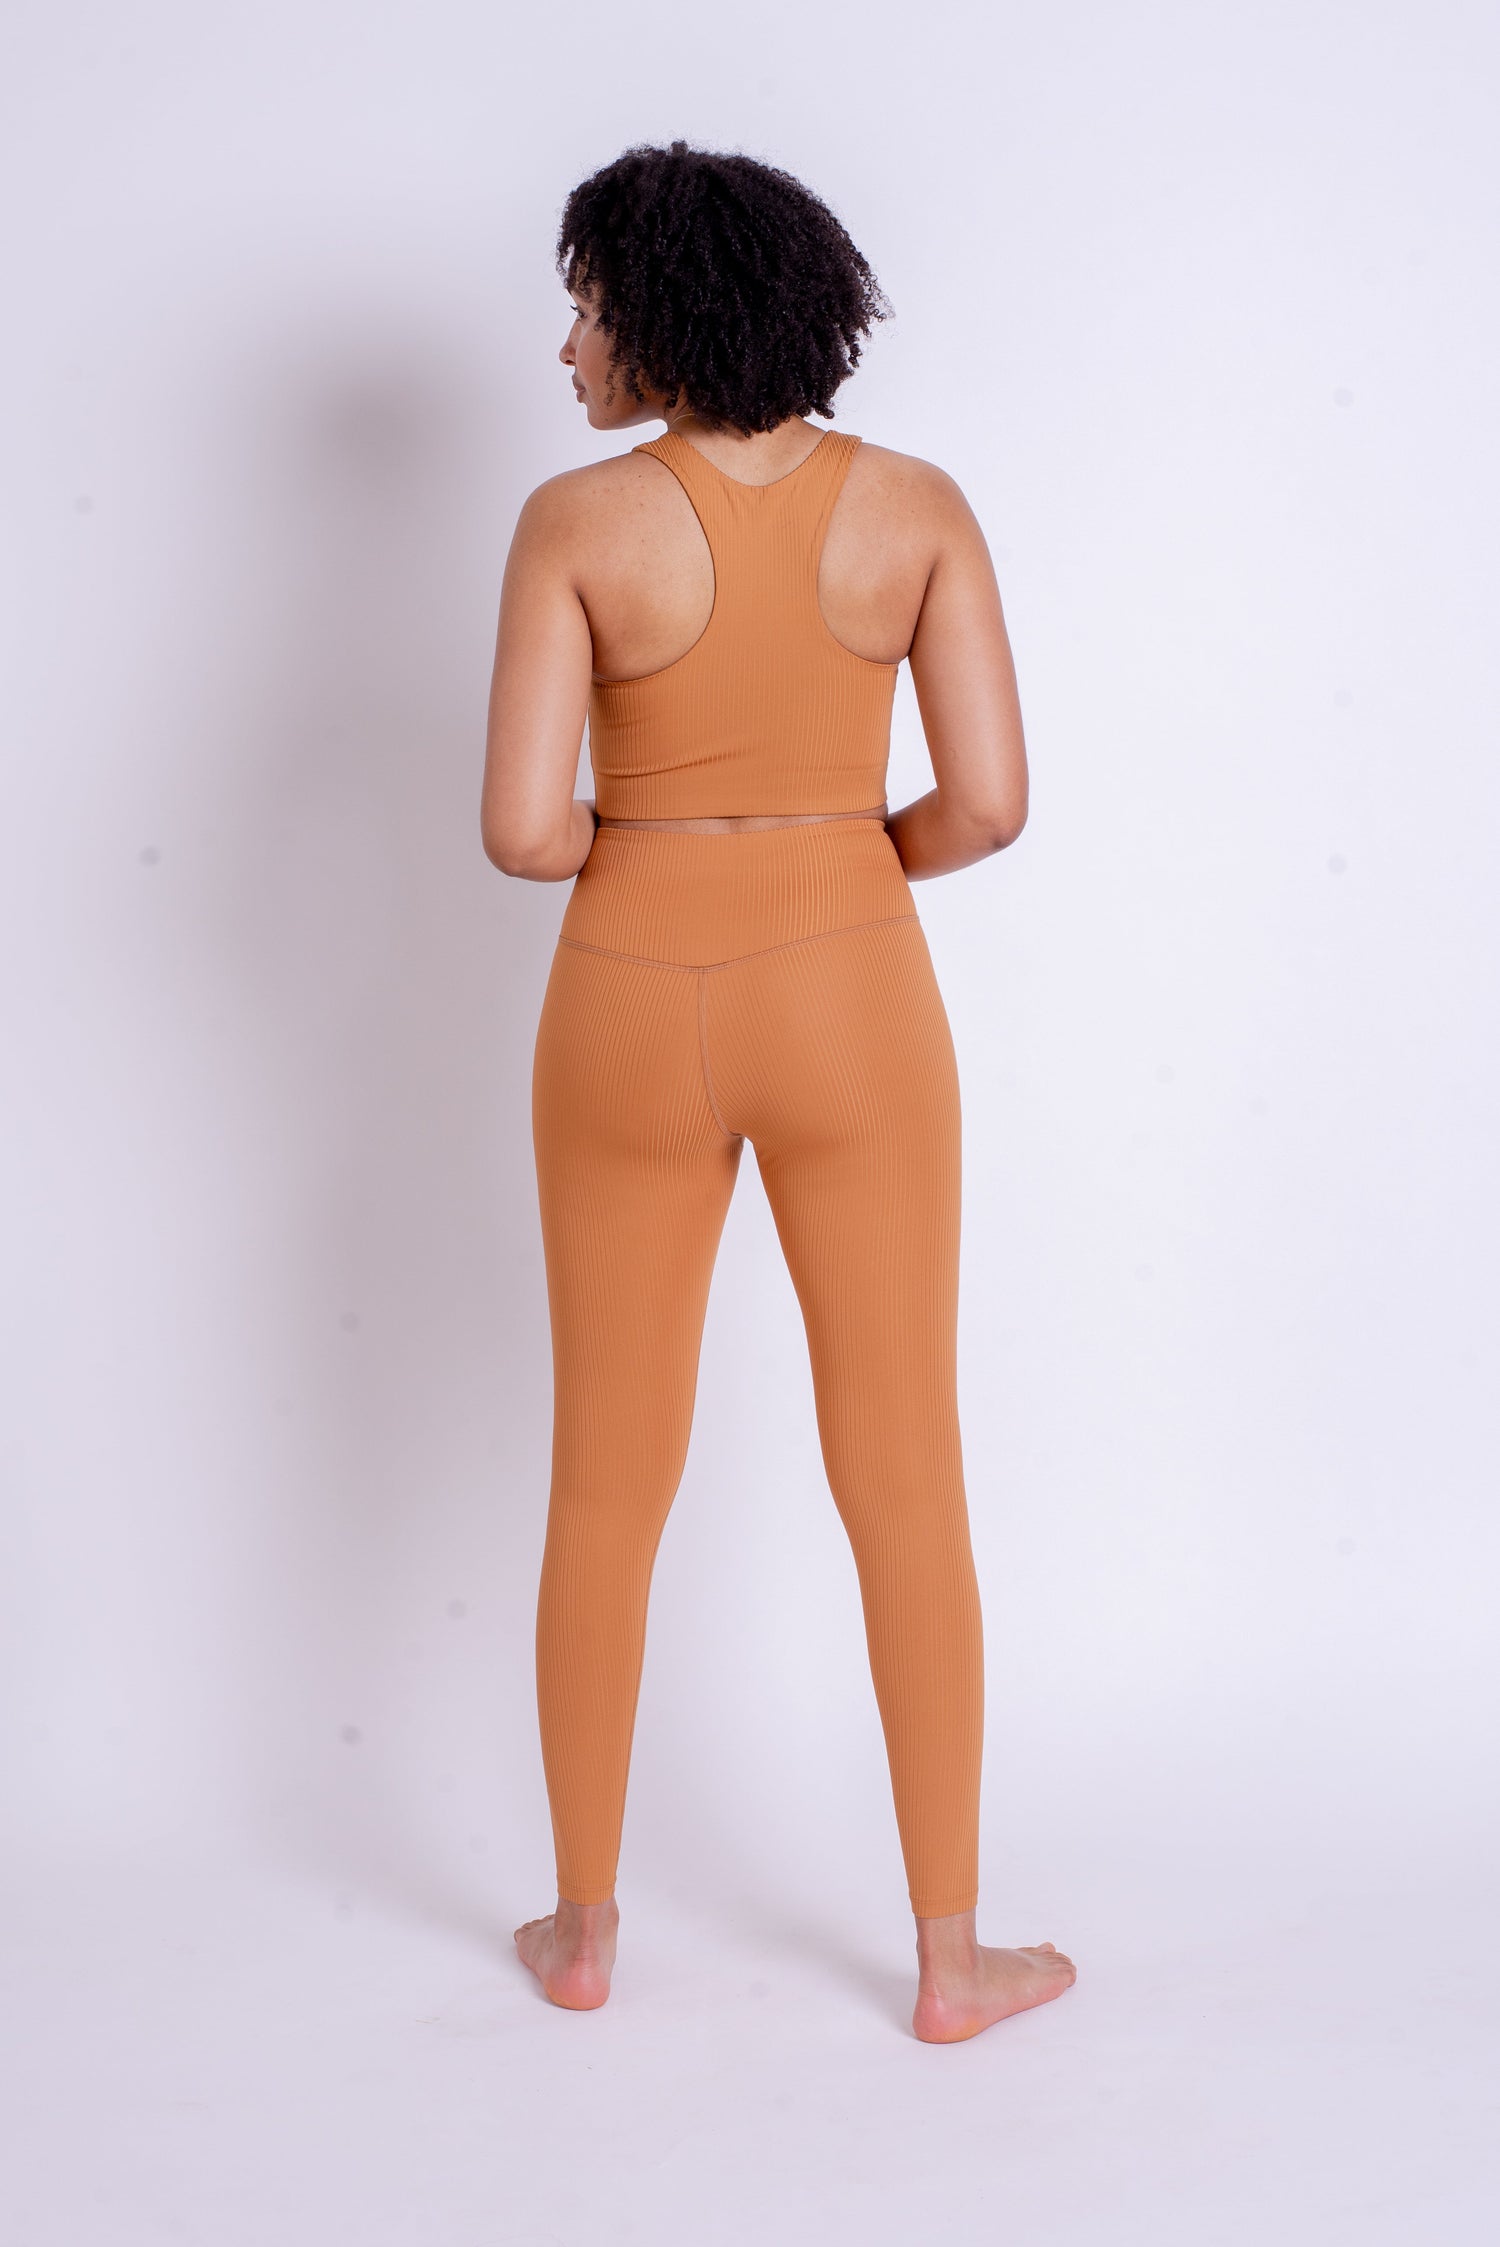 Girlfriend Collective RIB High-Rise Leggings - Made from recycled